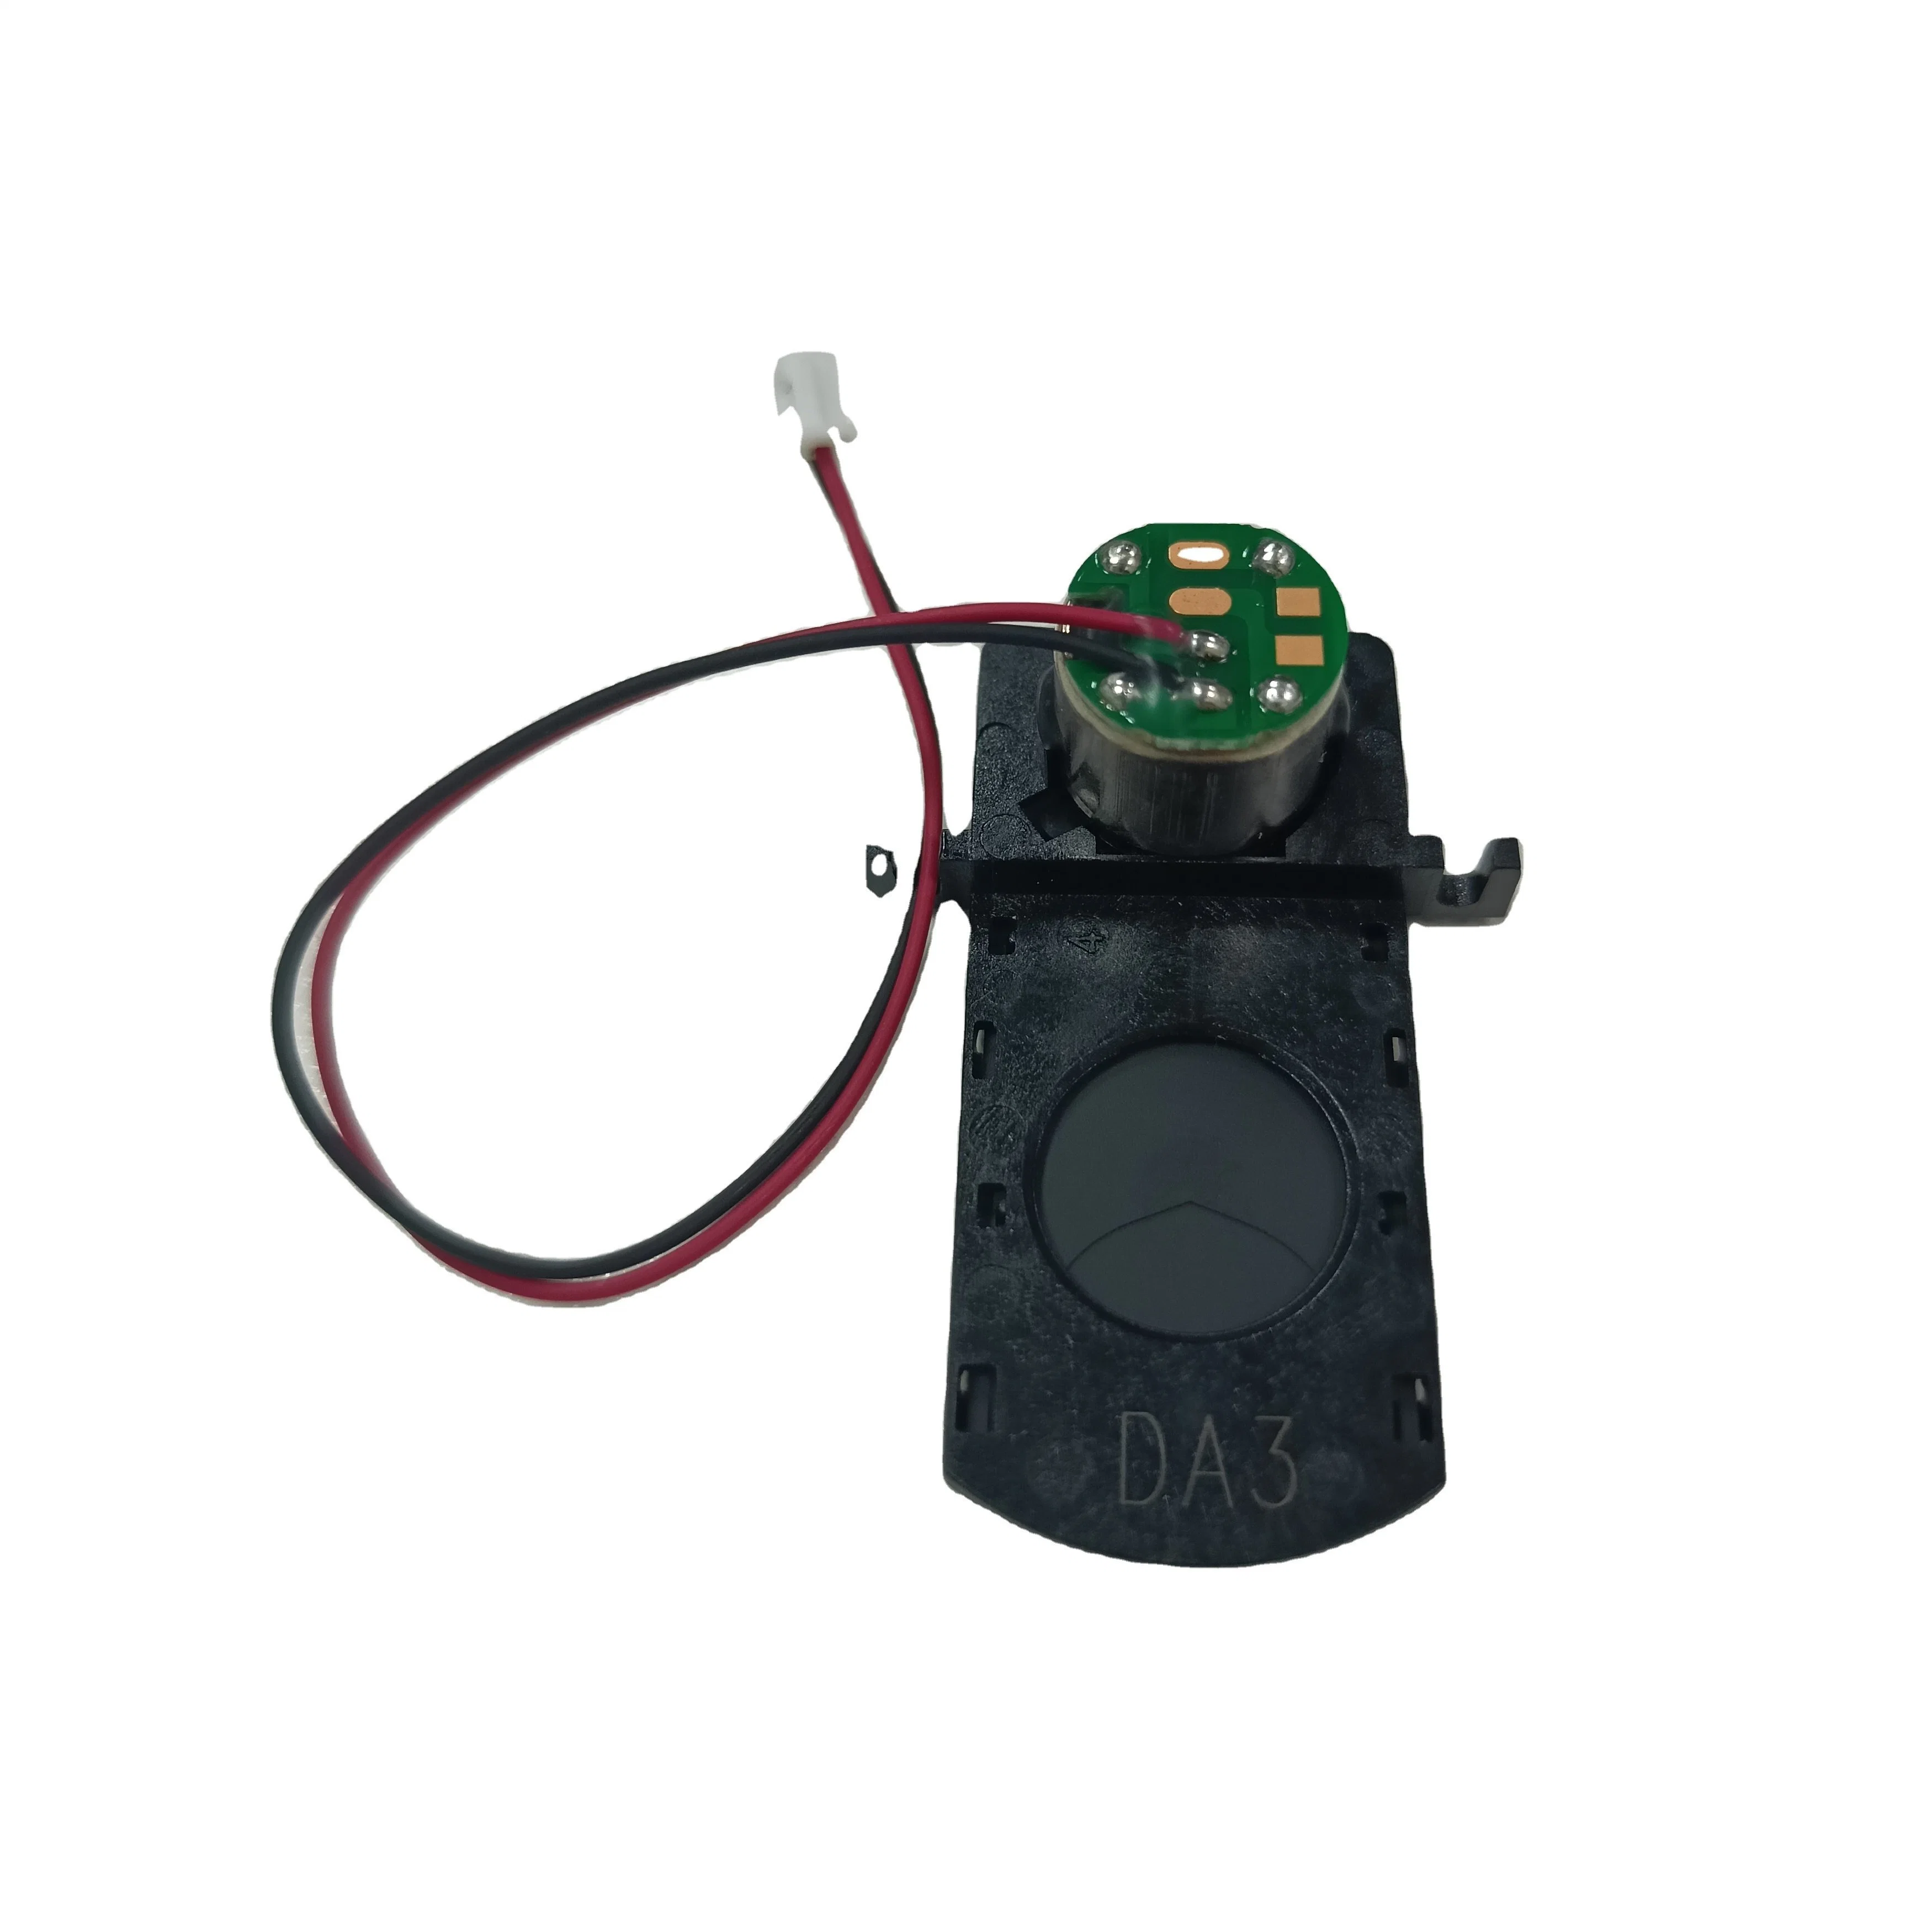 Double Blade IR Infrared Thermal Imaging Camera Shutter